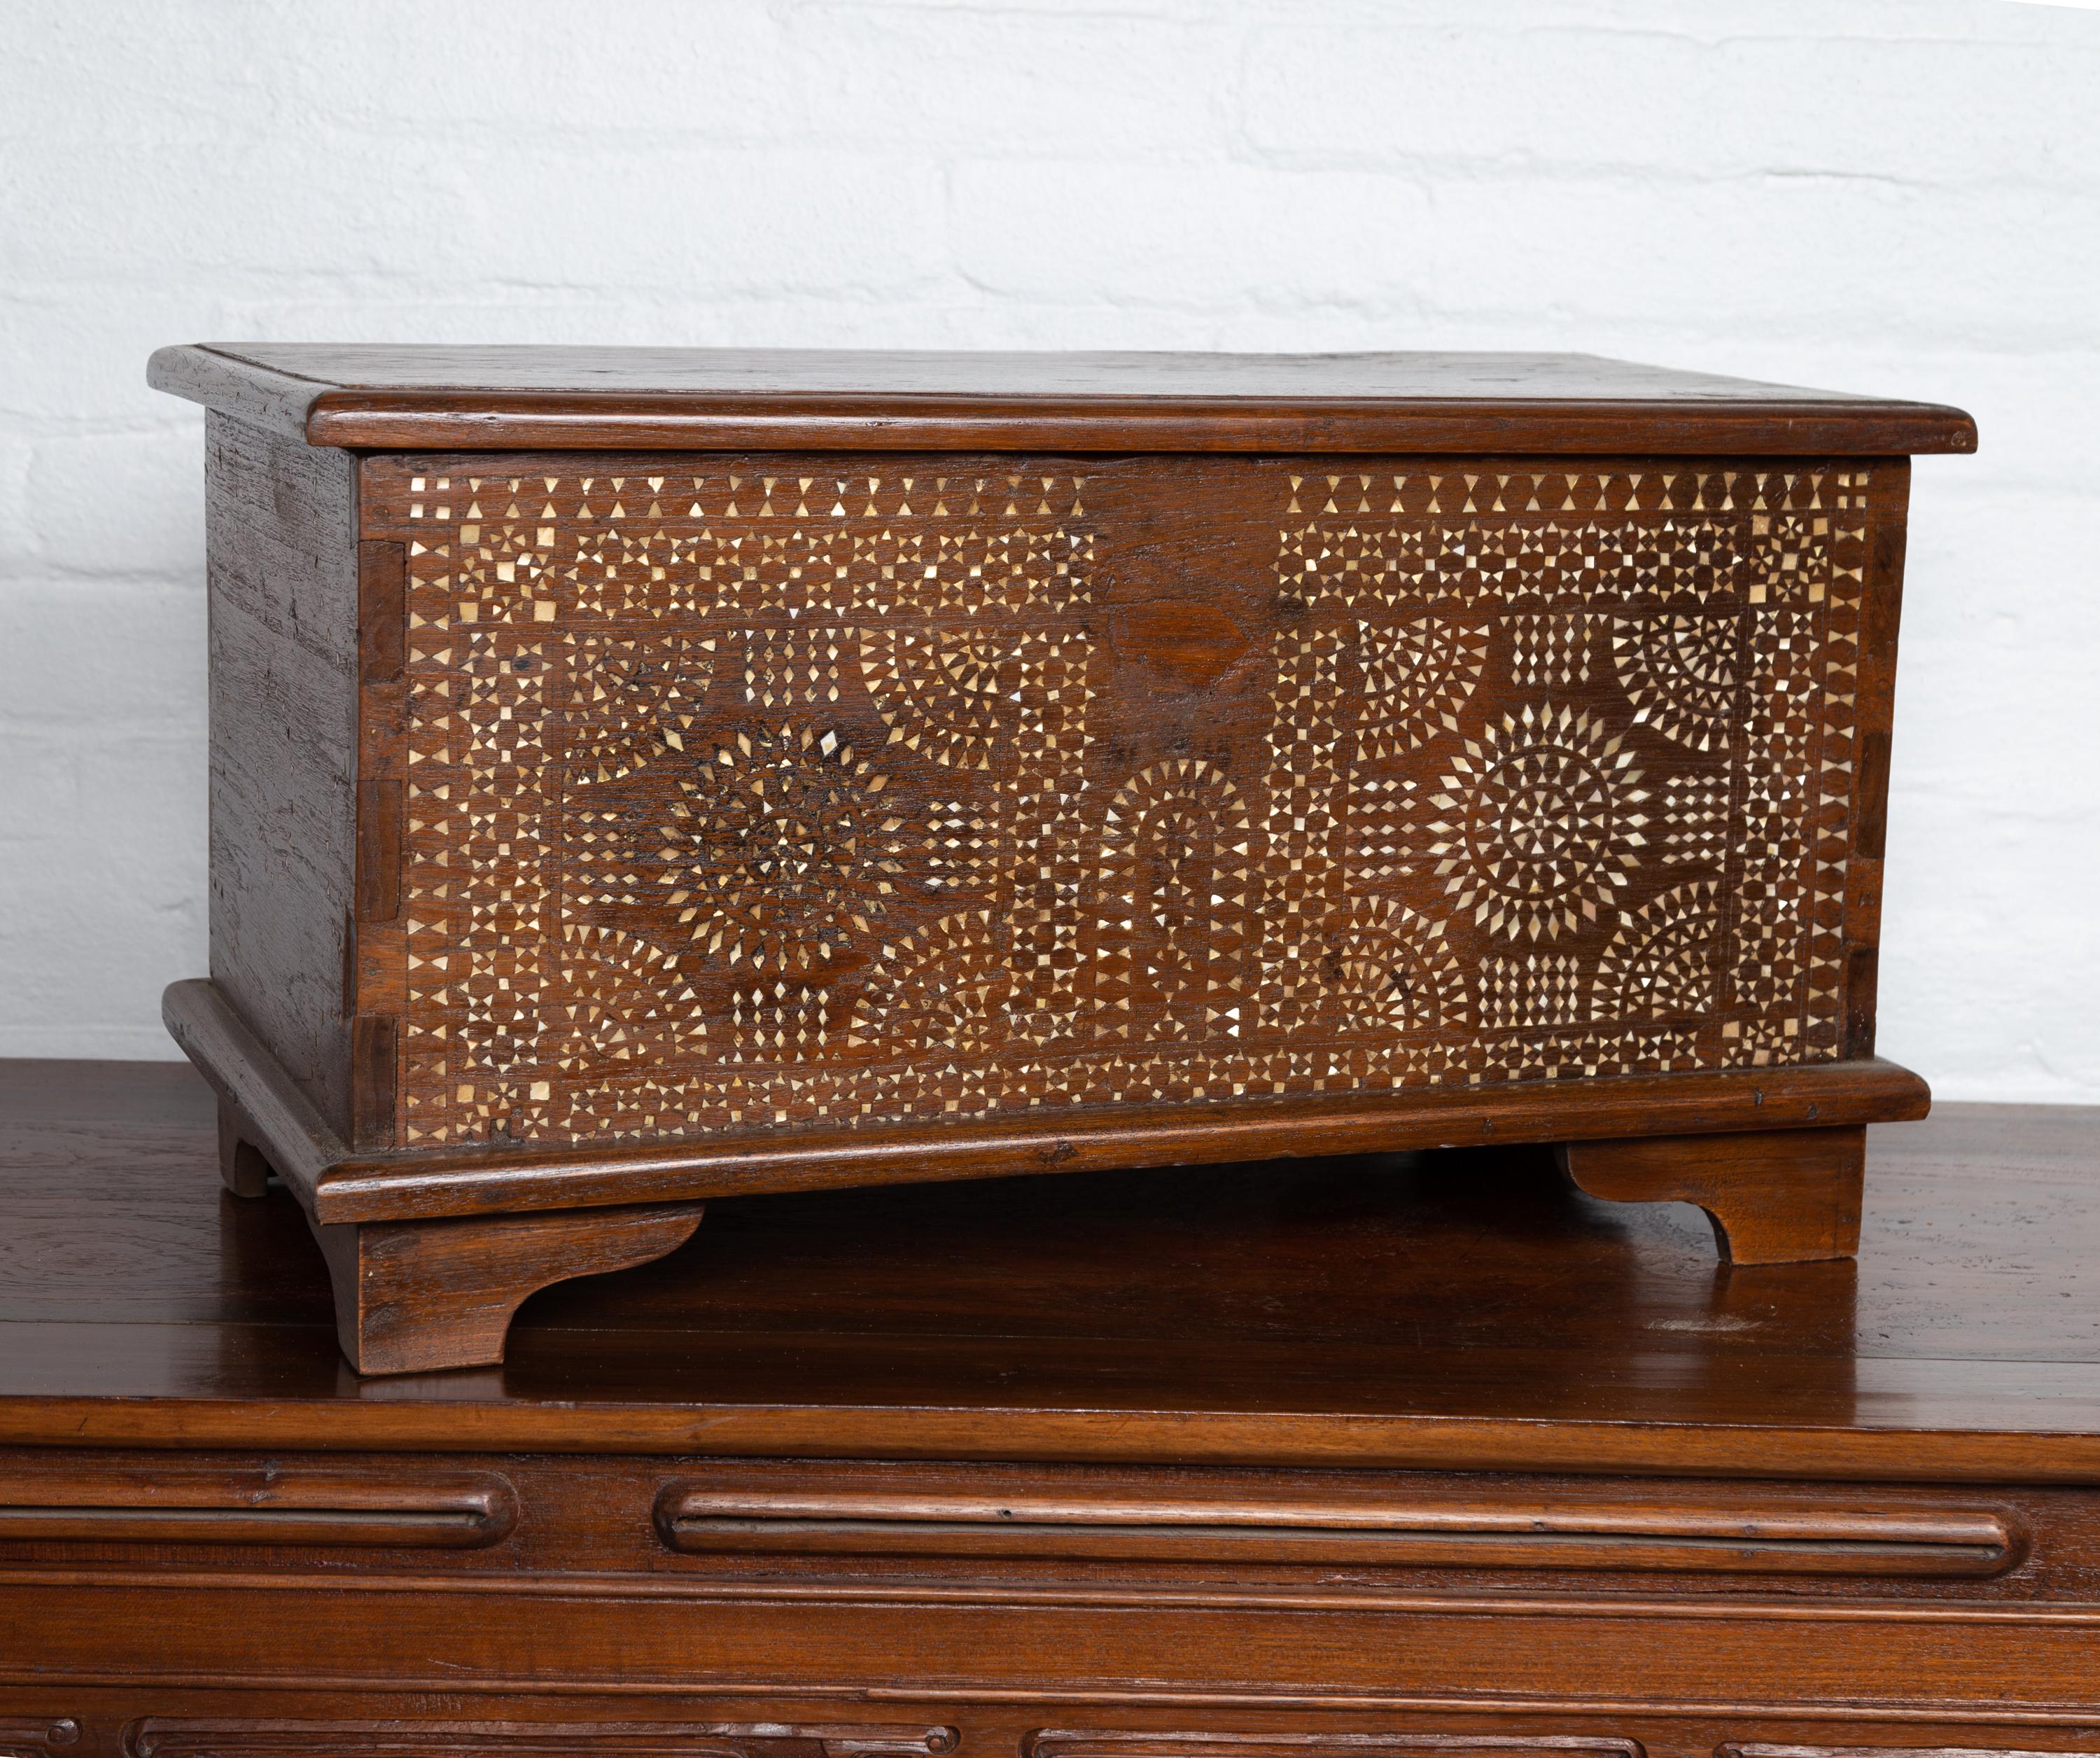 Early 20th Century Wooden Blanket Chest from Mindanao with Mother of Pearl Inlay 2